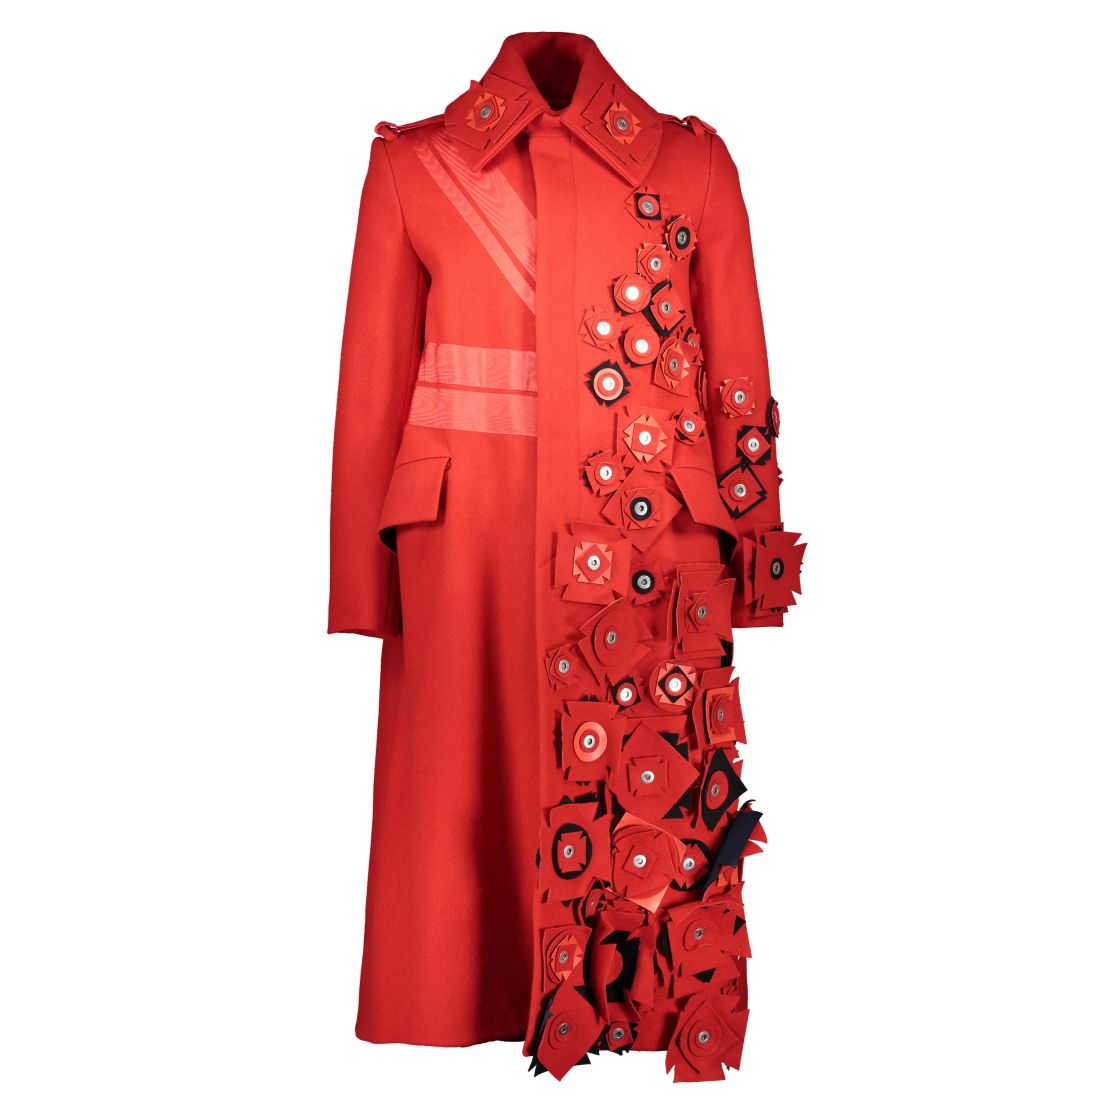 Red Wool Greatcoat, by Nicholas Yip, 2017